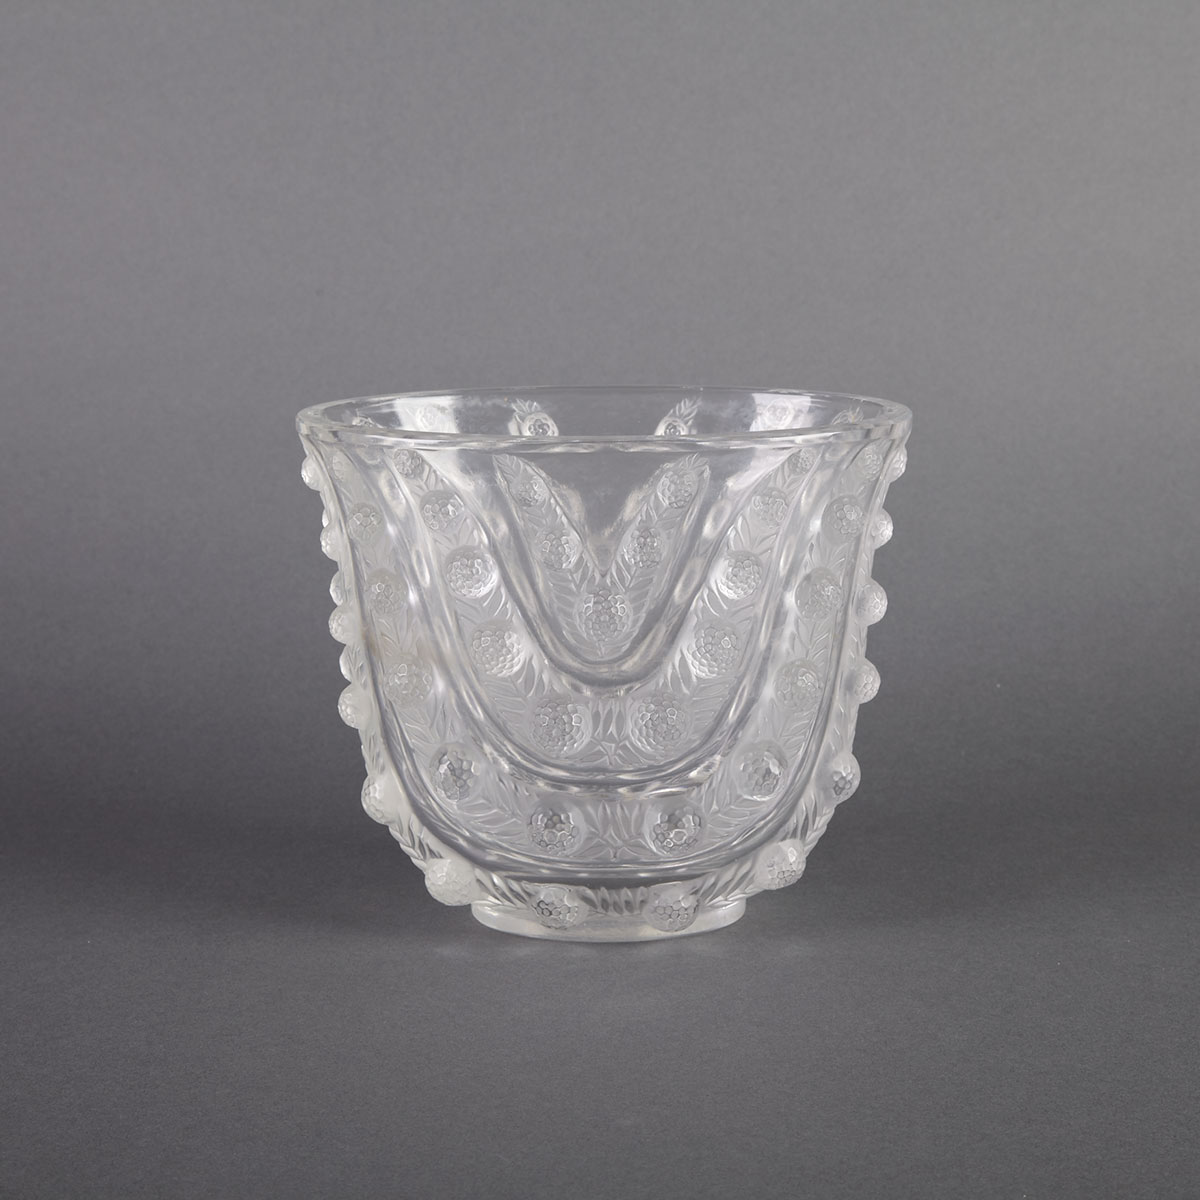 Vichy T Lalique Moulded Glass Vase mid-20th